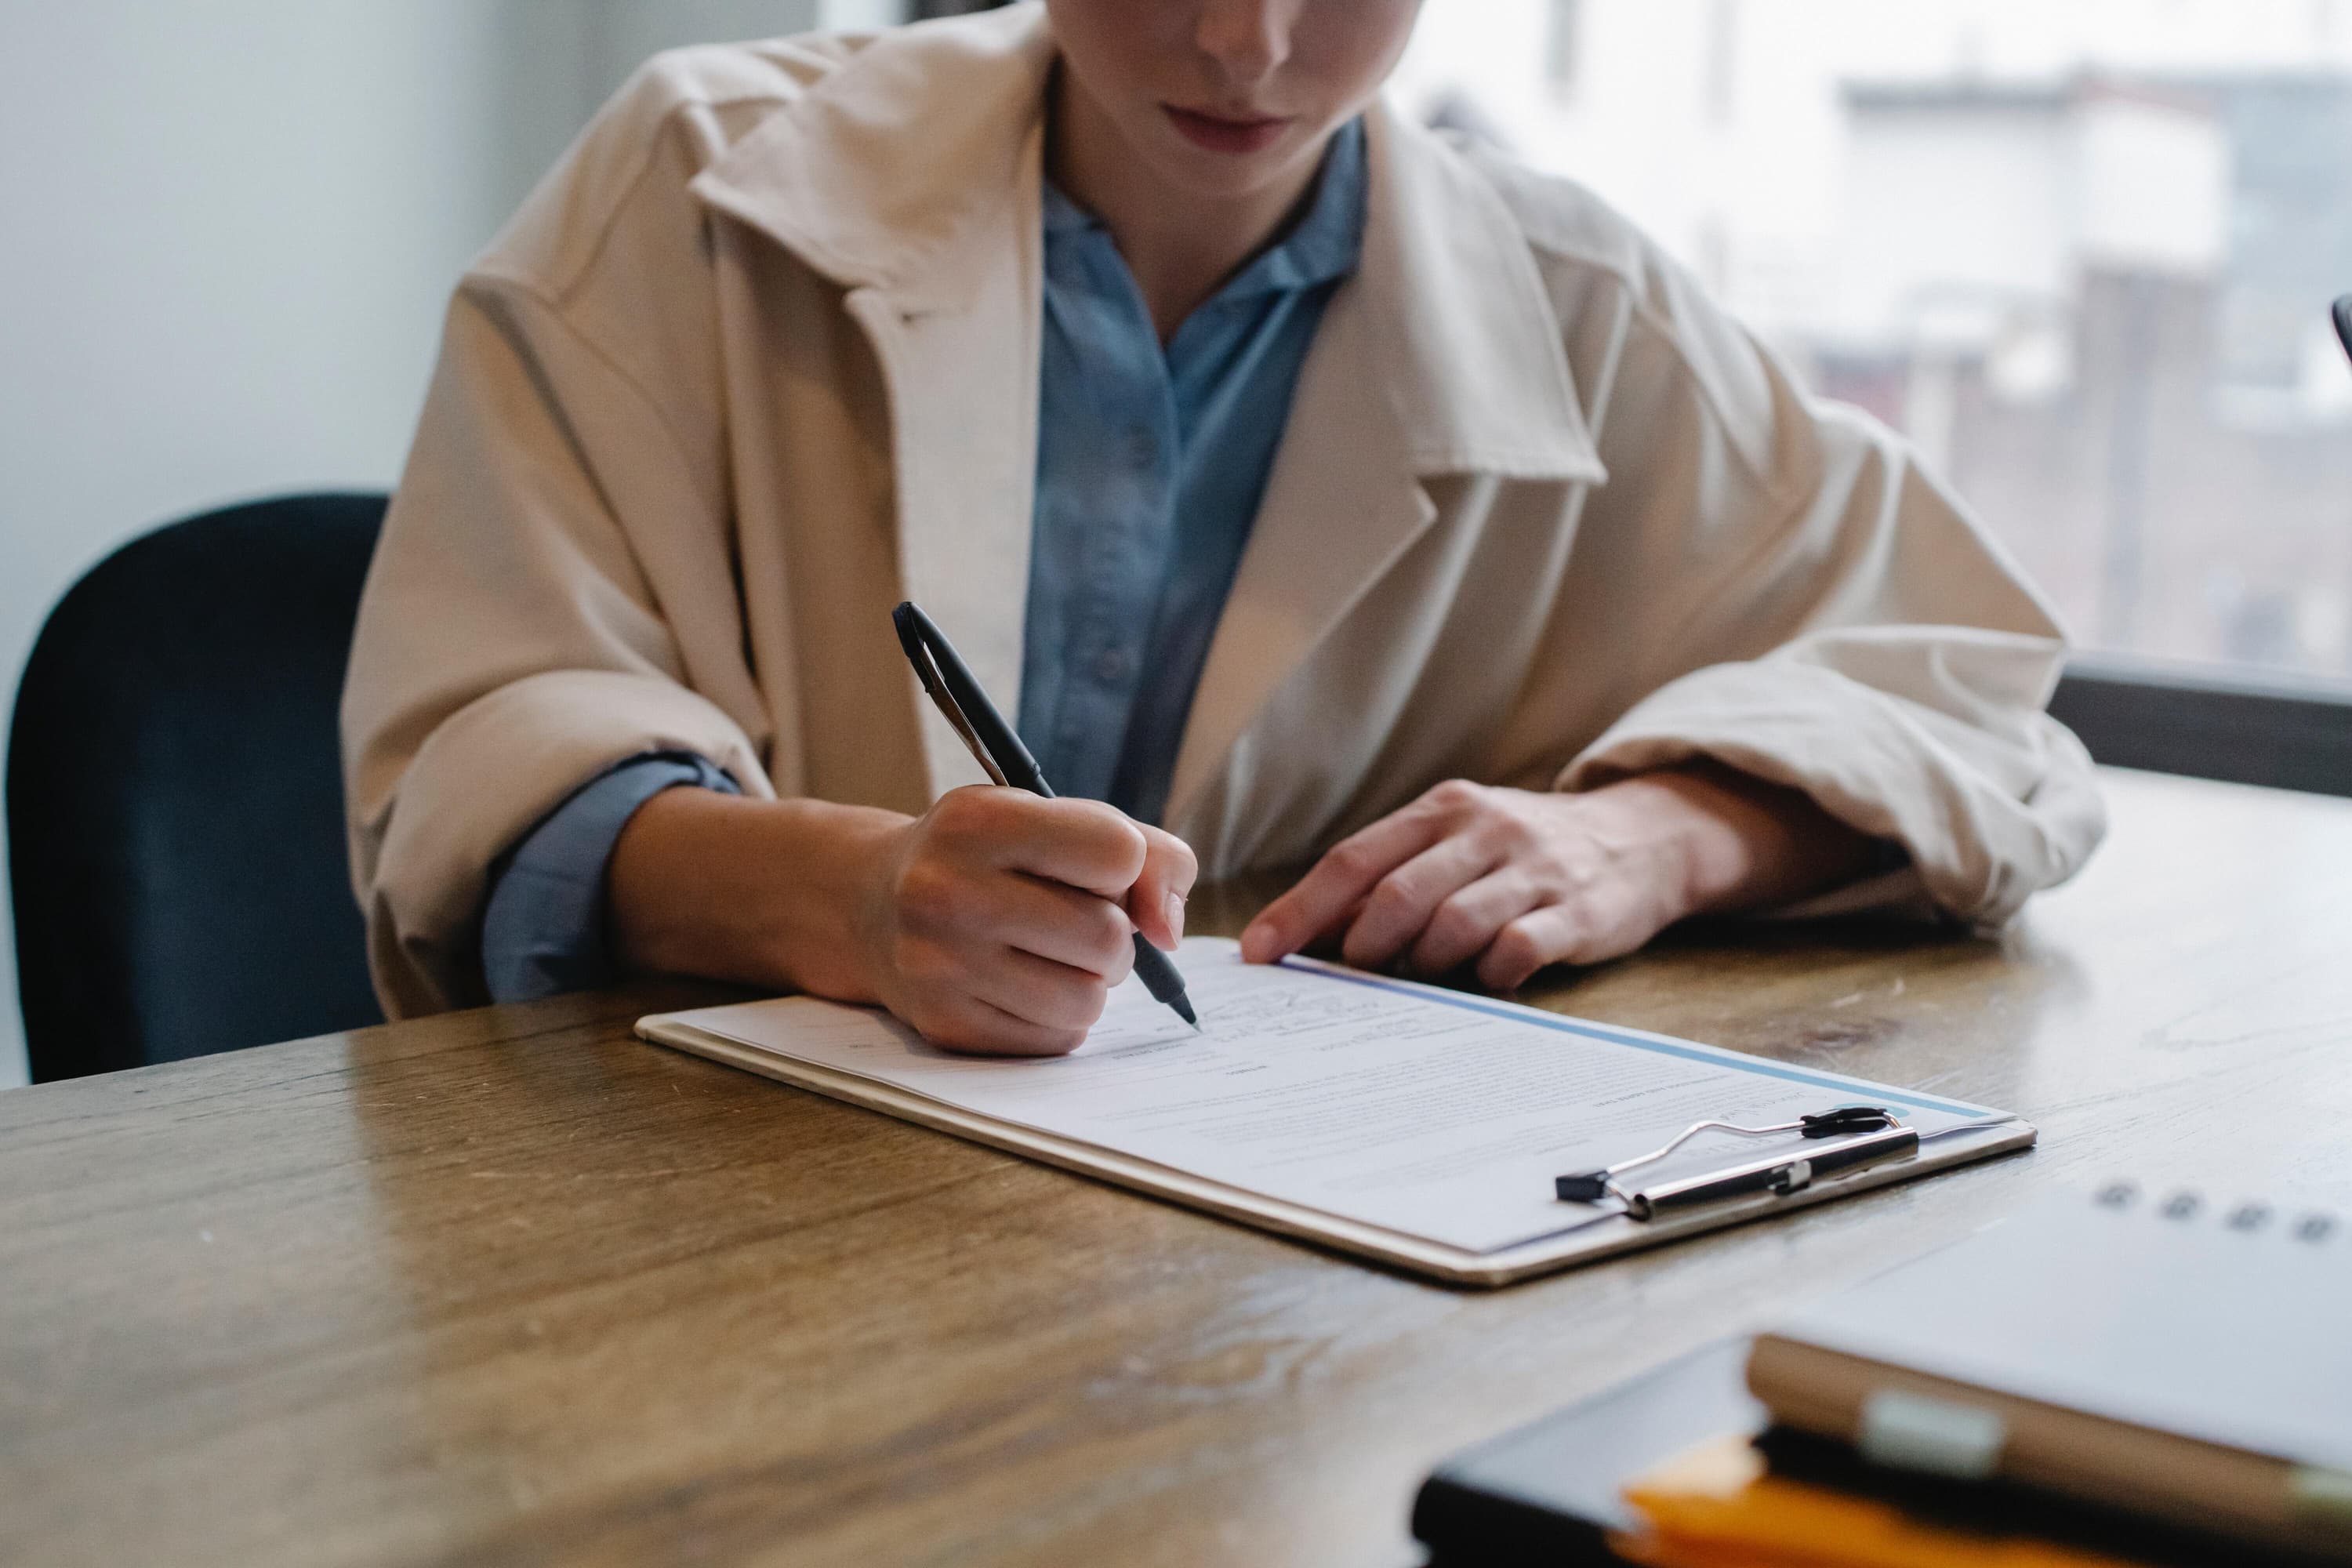 A person wearing a cream jacket and blue button-down is filling out forms on a clipboard with a pen.